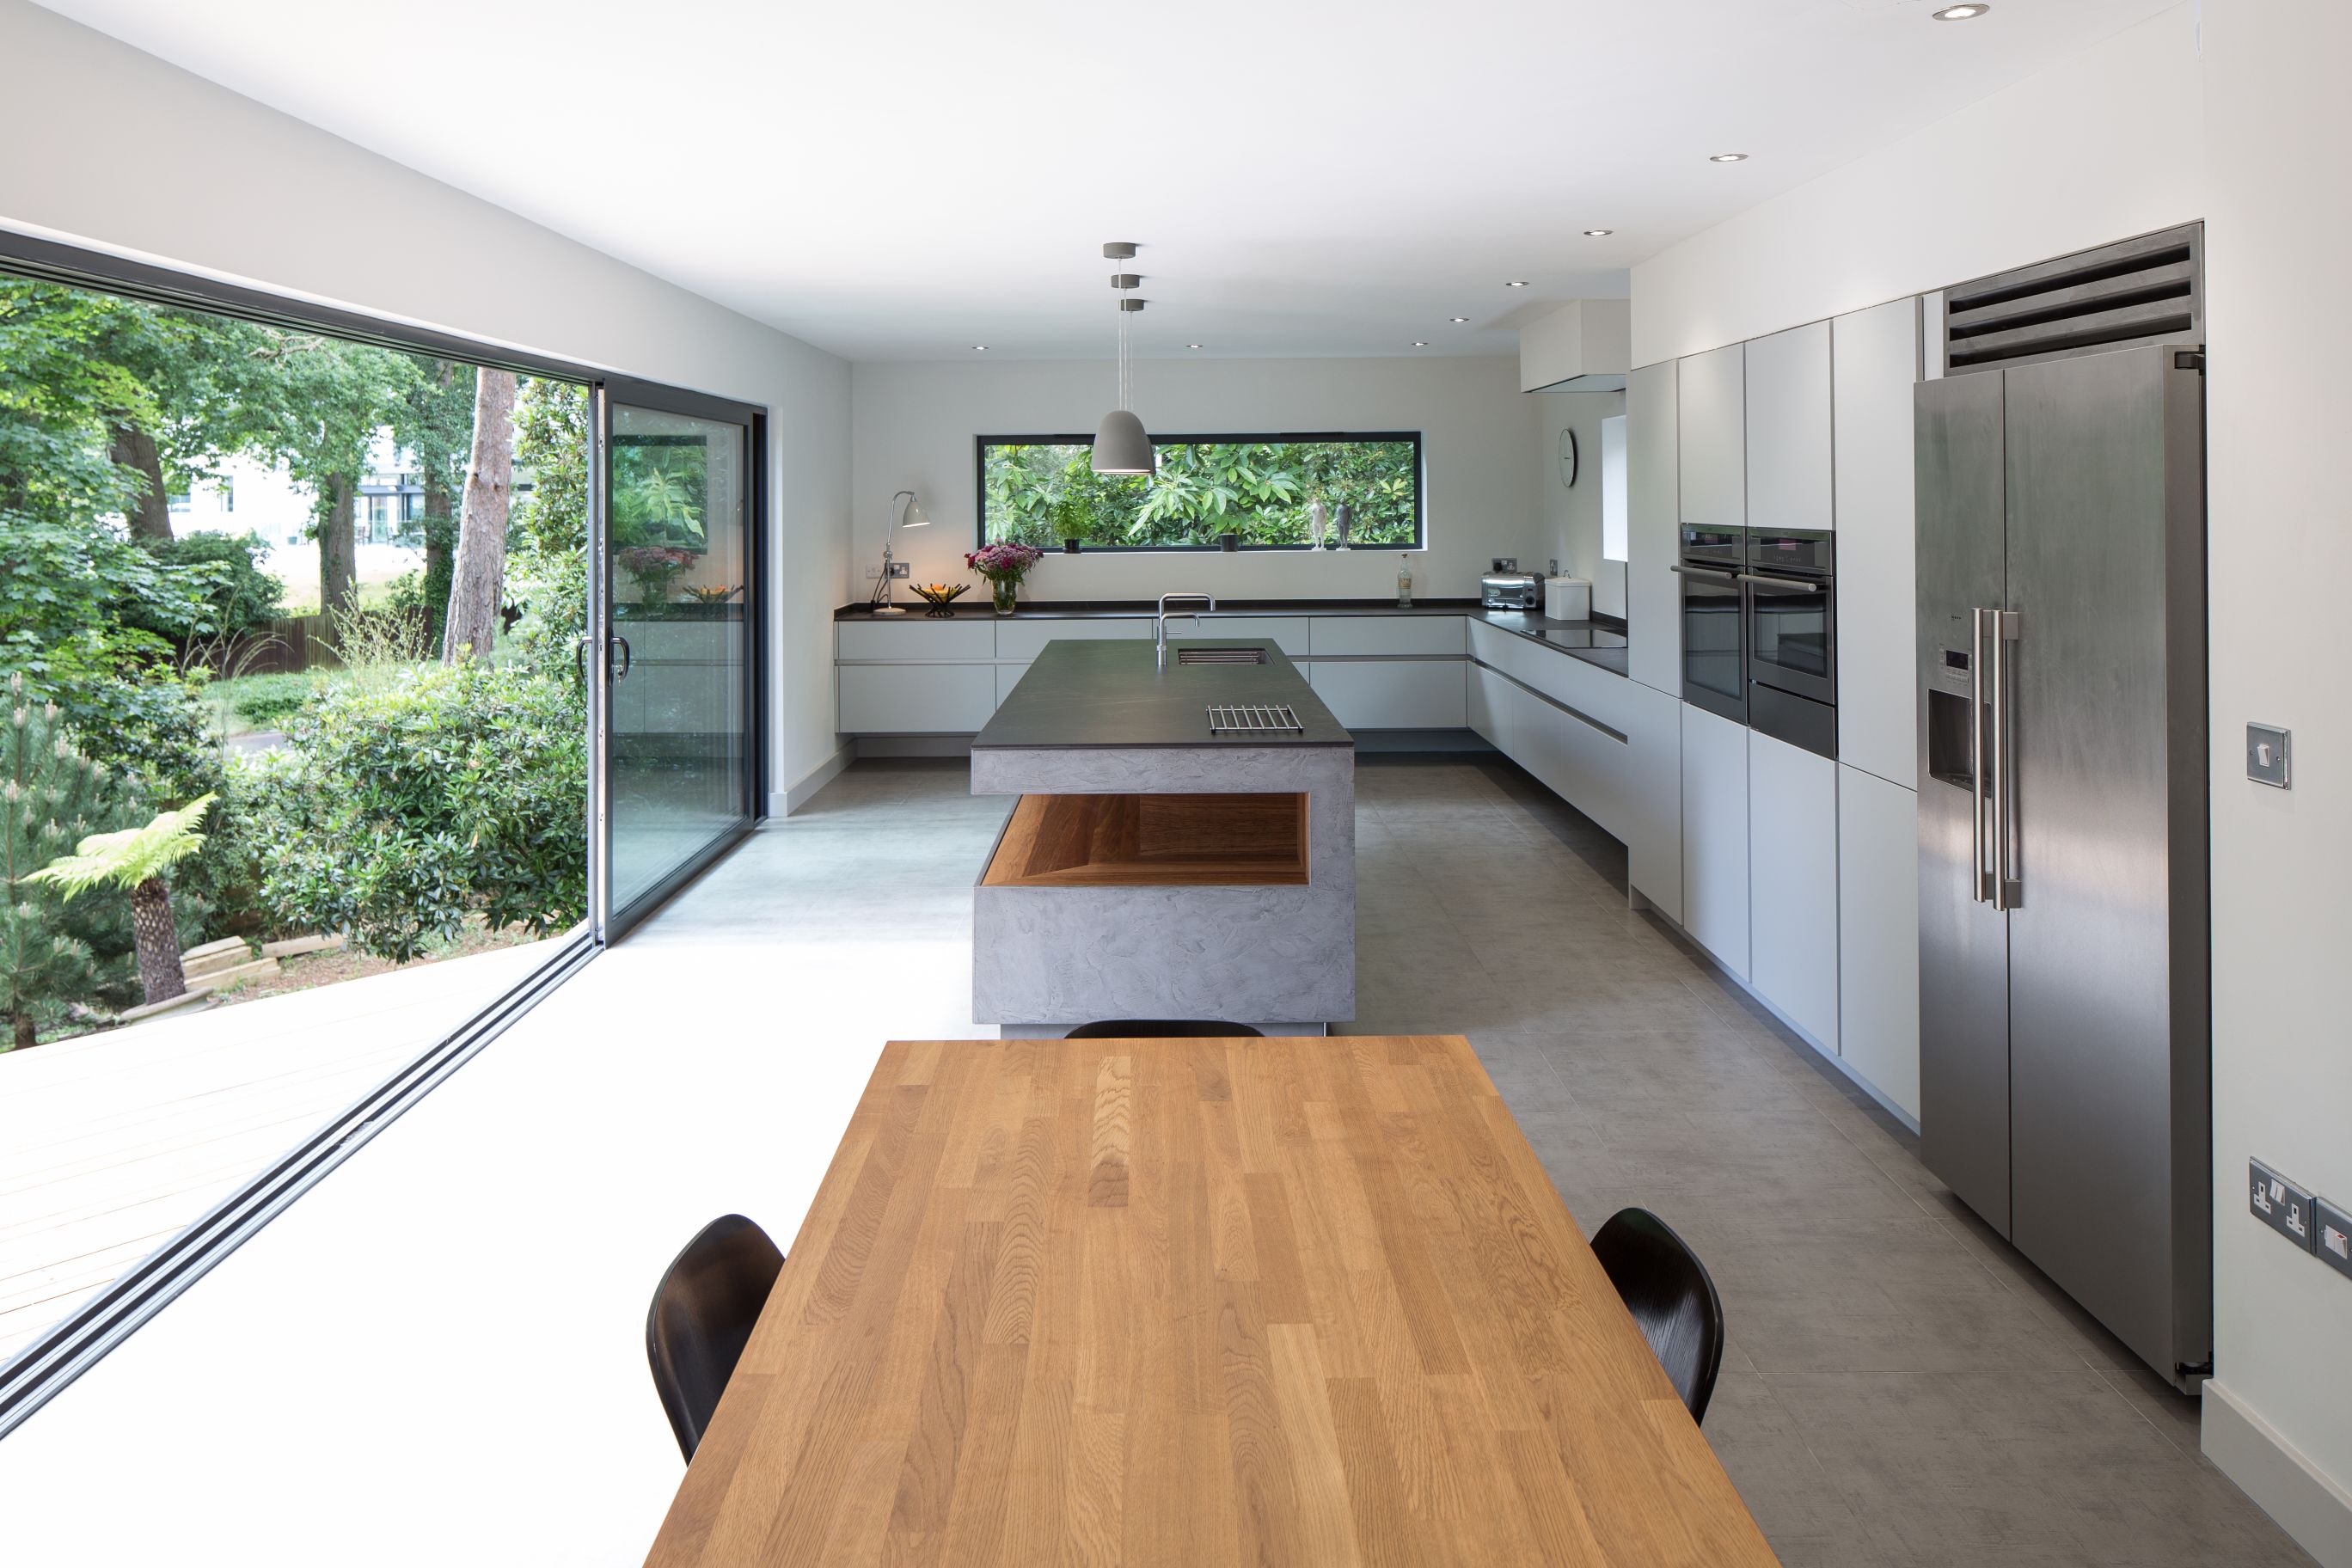 </p> <p>Find your ideal home design pro on designfor-me.com - get matched and see who's interested in your home project. Click image to see more inspiration from our design pros</p> <p>Design by Peter, architect from Bournemouth, South West</p> <p>#architecture #homedesign #modernhomes #homeinspiration #kitchens #kitchendesign #kitcheninspiration #kitchenideas #kitchengoals #extensions #extensiondesign #extensioninspiration #extensionideas #houseextension #slidingdoors </p> <p>